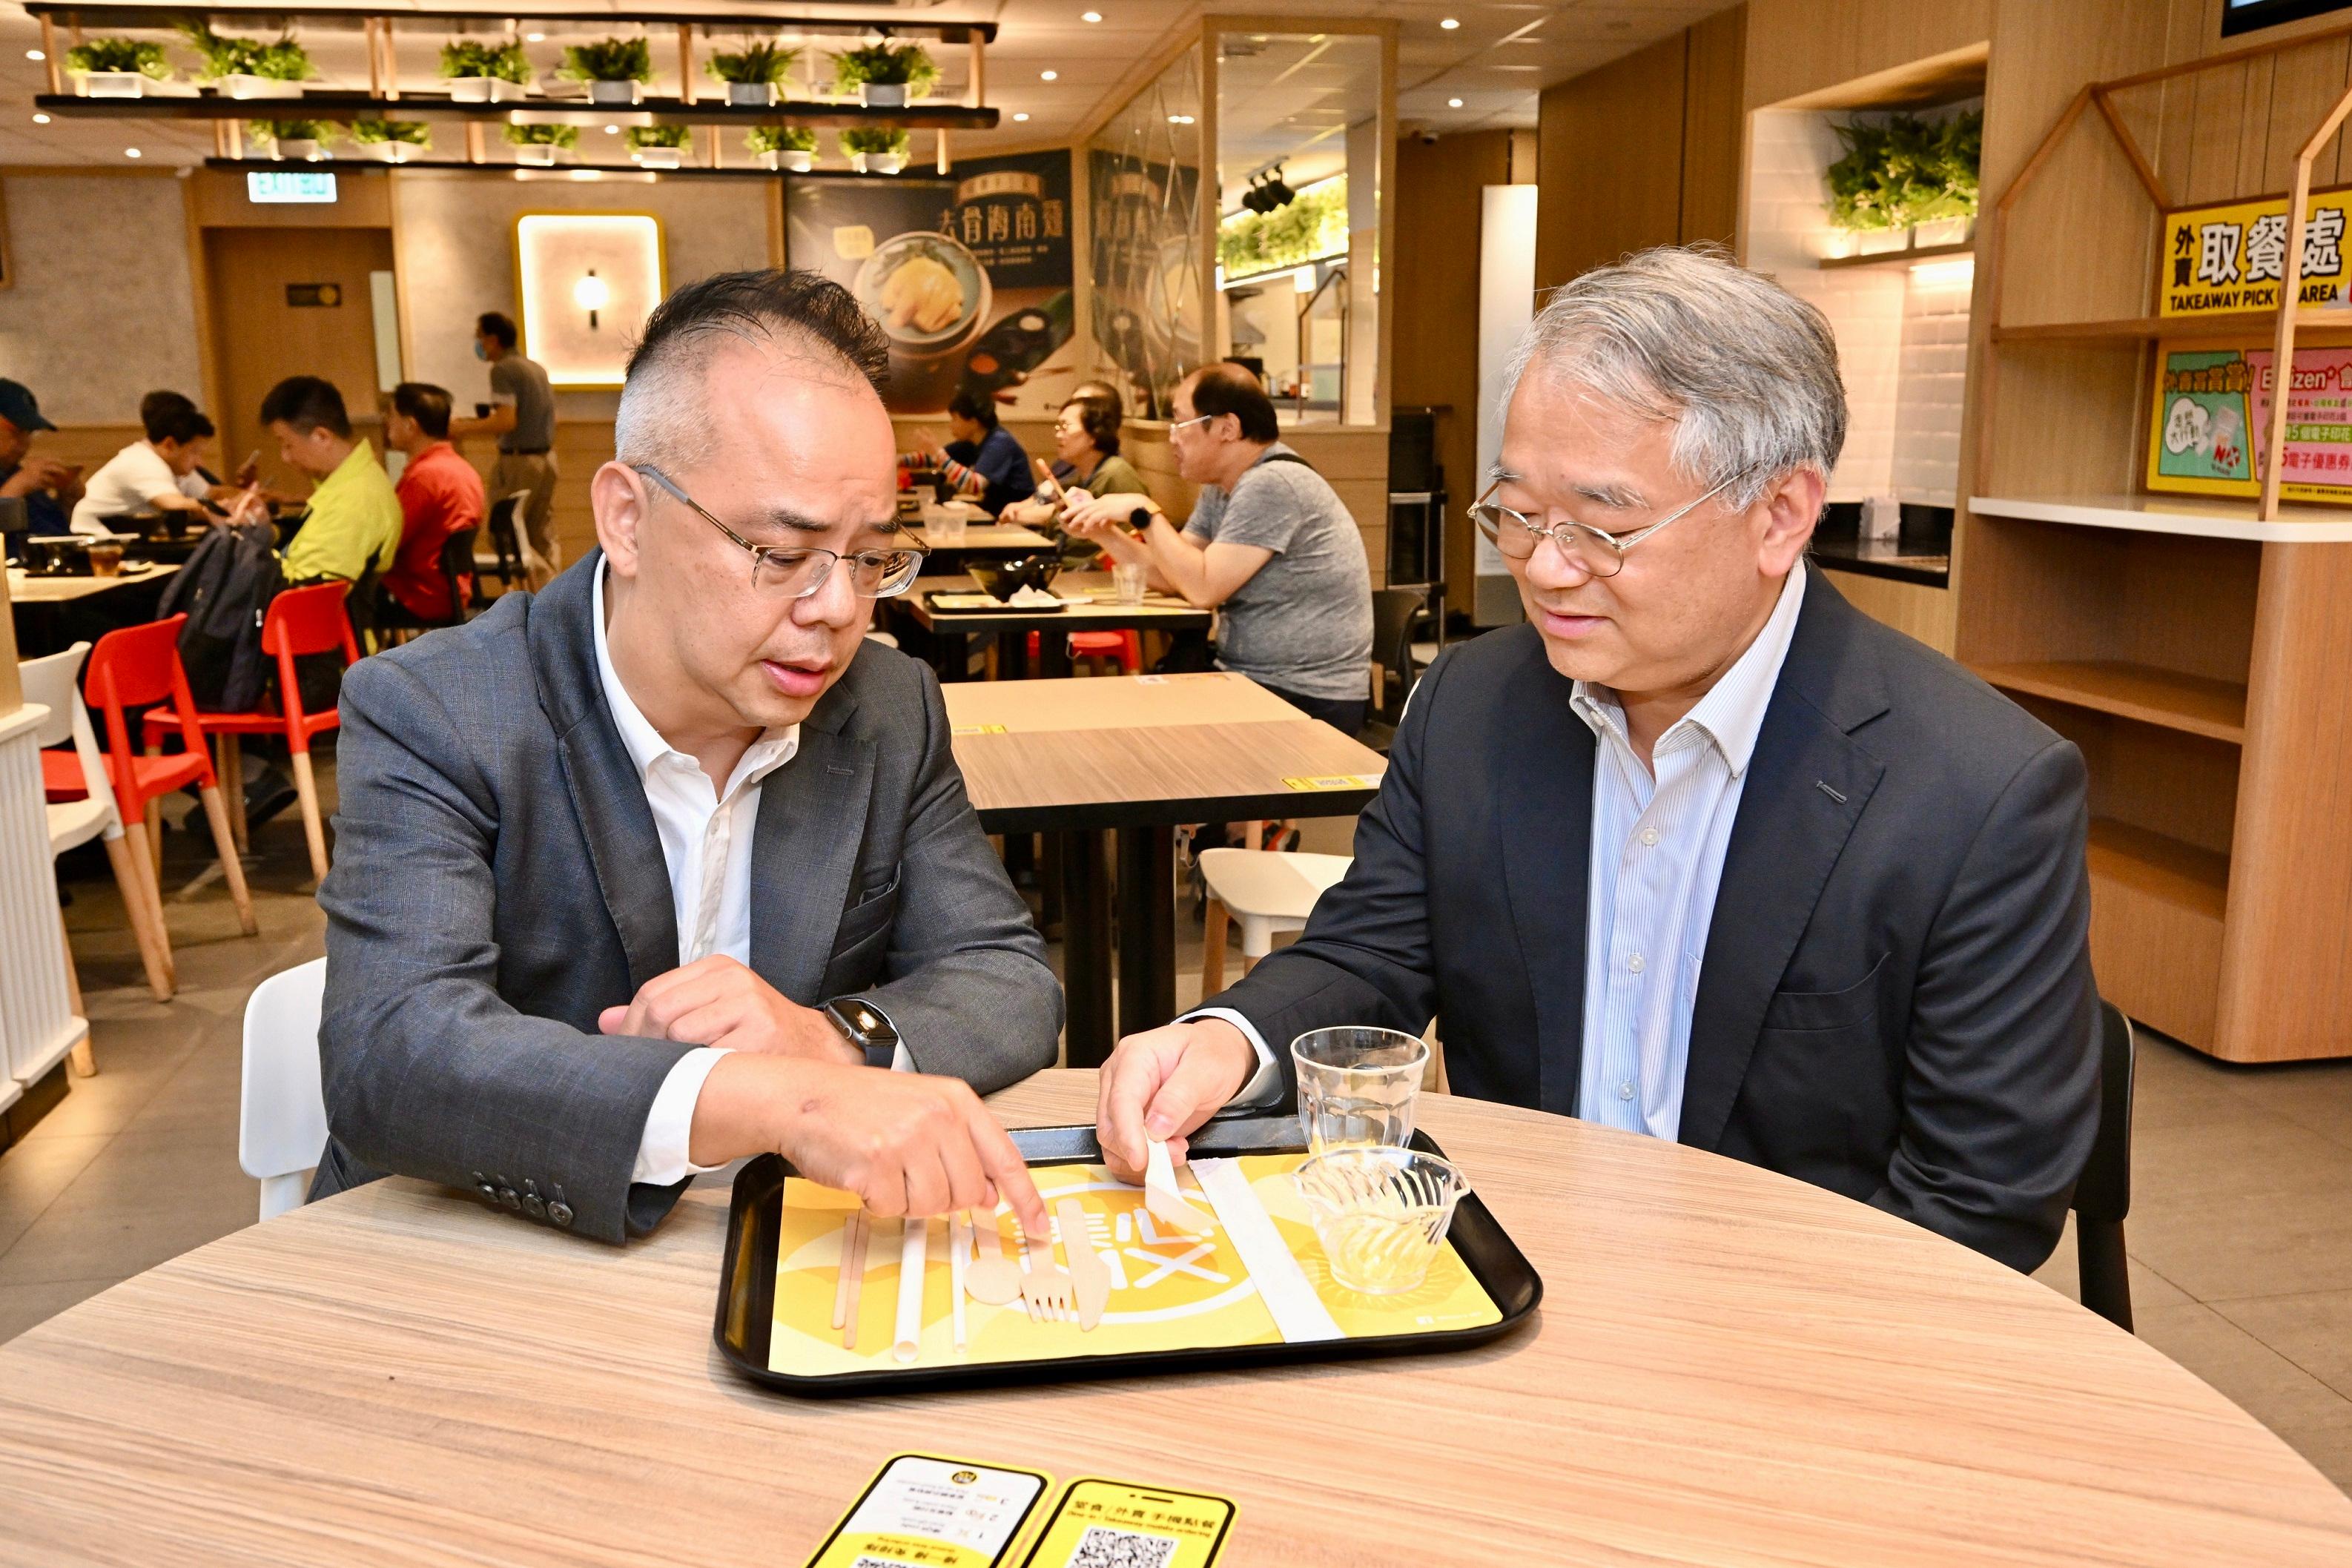 The relevant legislation for the regulation of disposable plastic tableware and other plastic products will come into effect on April 22 (Monday, Earth Day). The Director of Environmental Protection, Dr Samuel Chui, today (April 18) visited branches of large chain restaurant groups in Hong Kong to understand the trade's preparations for the implementation of the new legislation. Photo shows Dr Chui (right) chatting with a person-in-charge of a restaurant to learn about the alternative tableware to be provided by the restaurant.